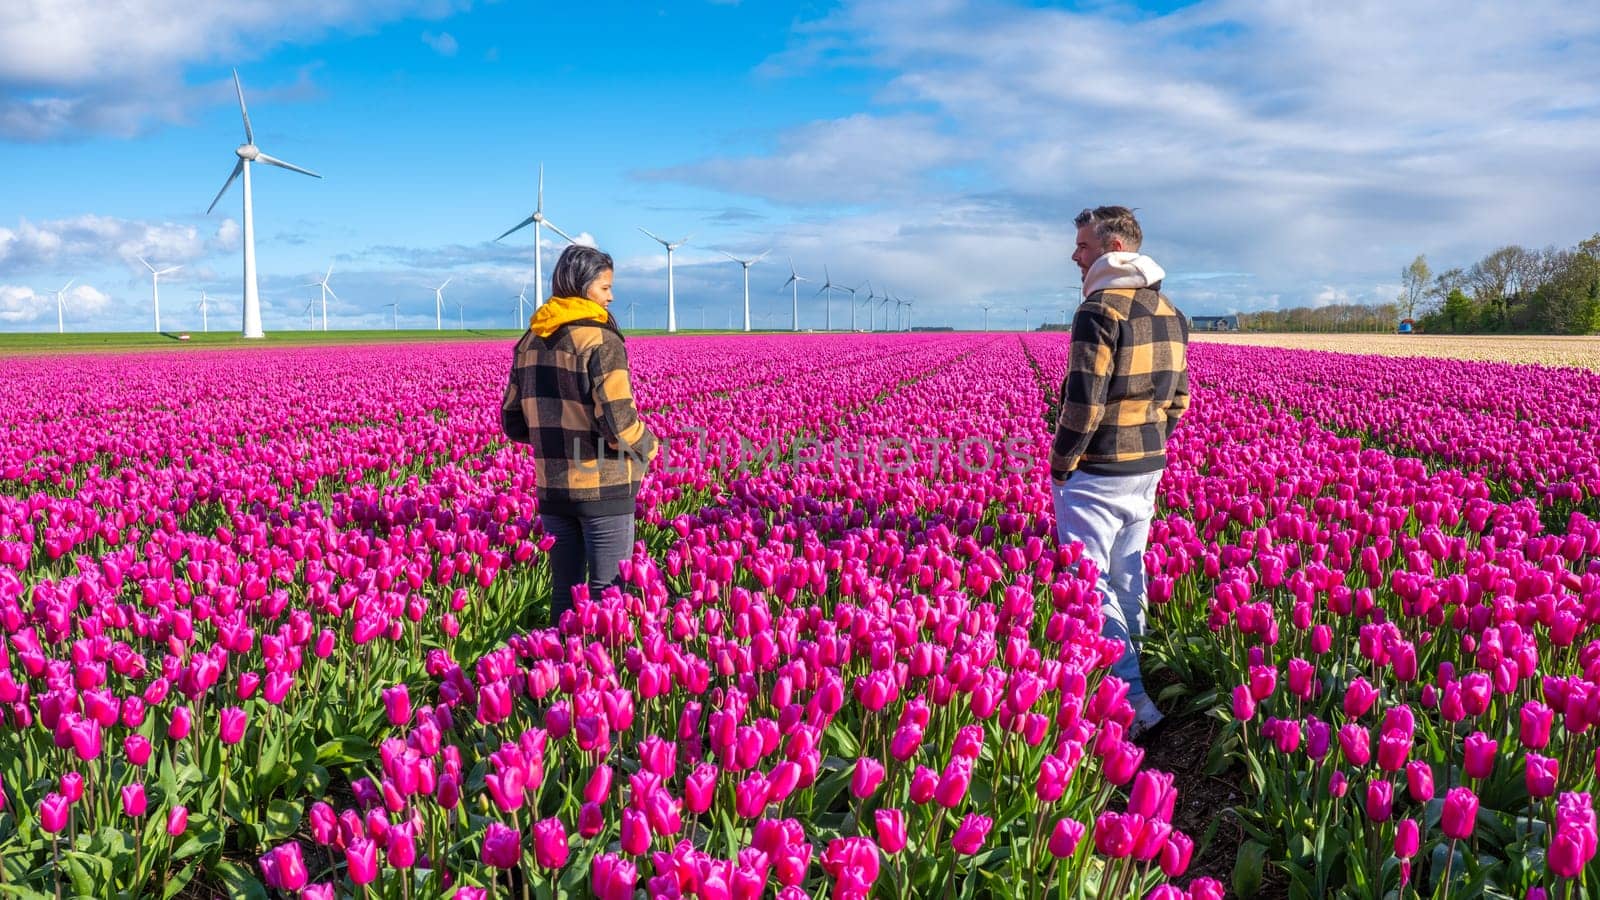 Two people standing gracefully in a vibrant field of purple tulips, surrounded by the beauty of nature in full bloom by fokkebok